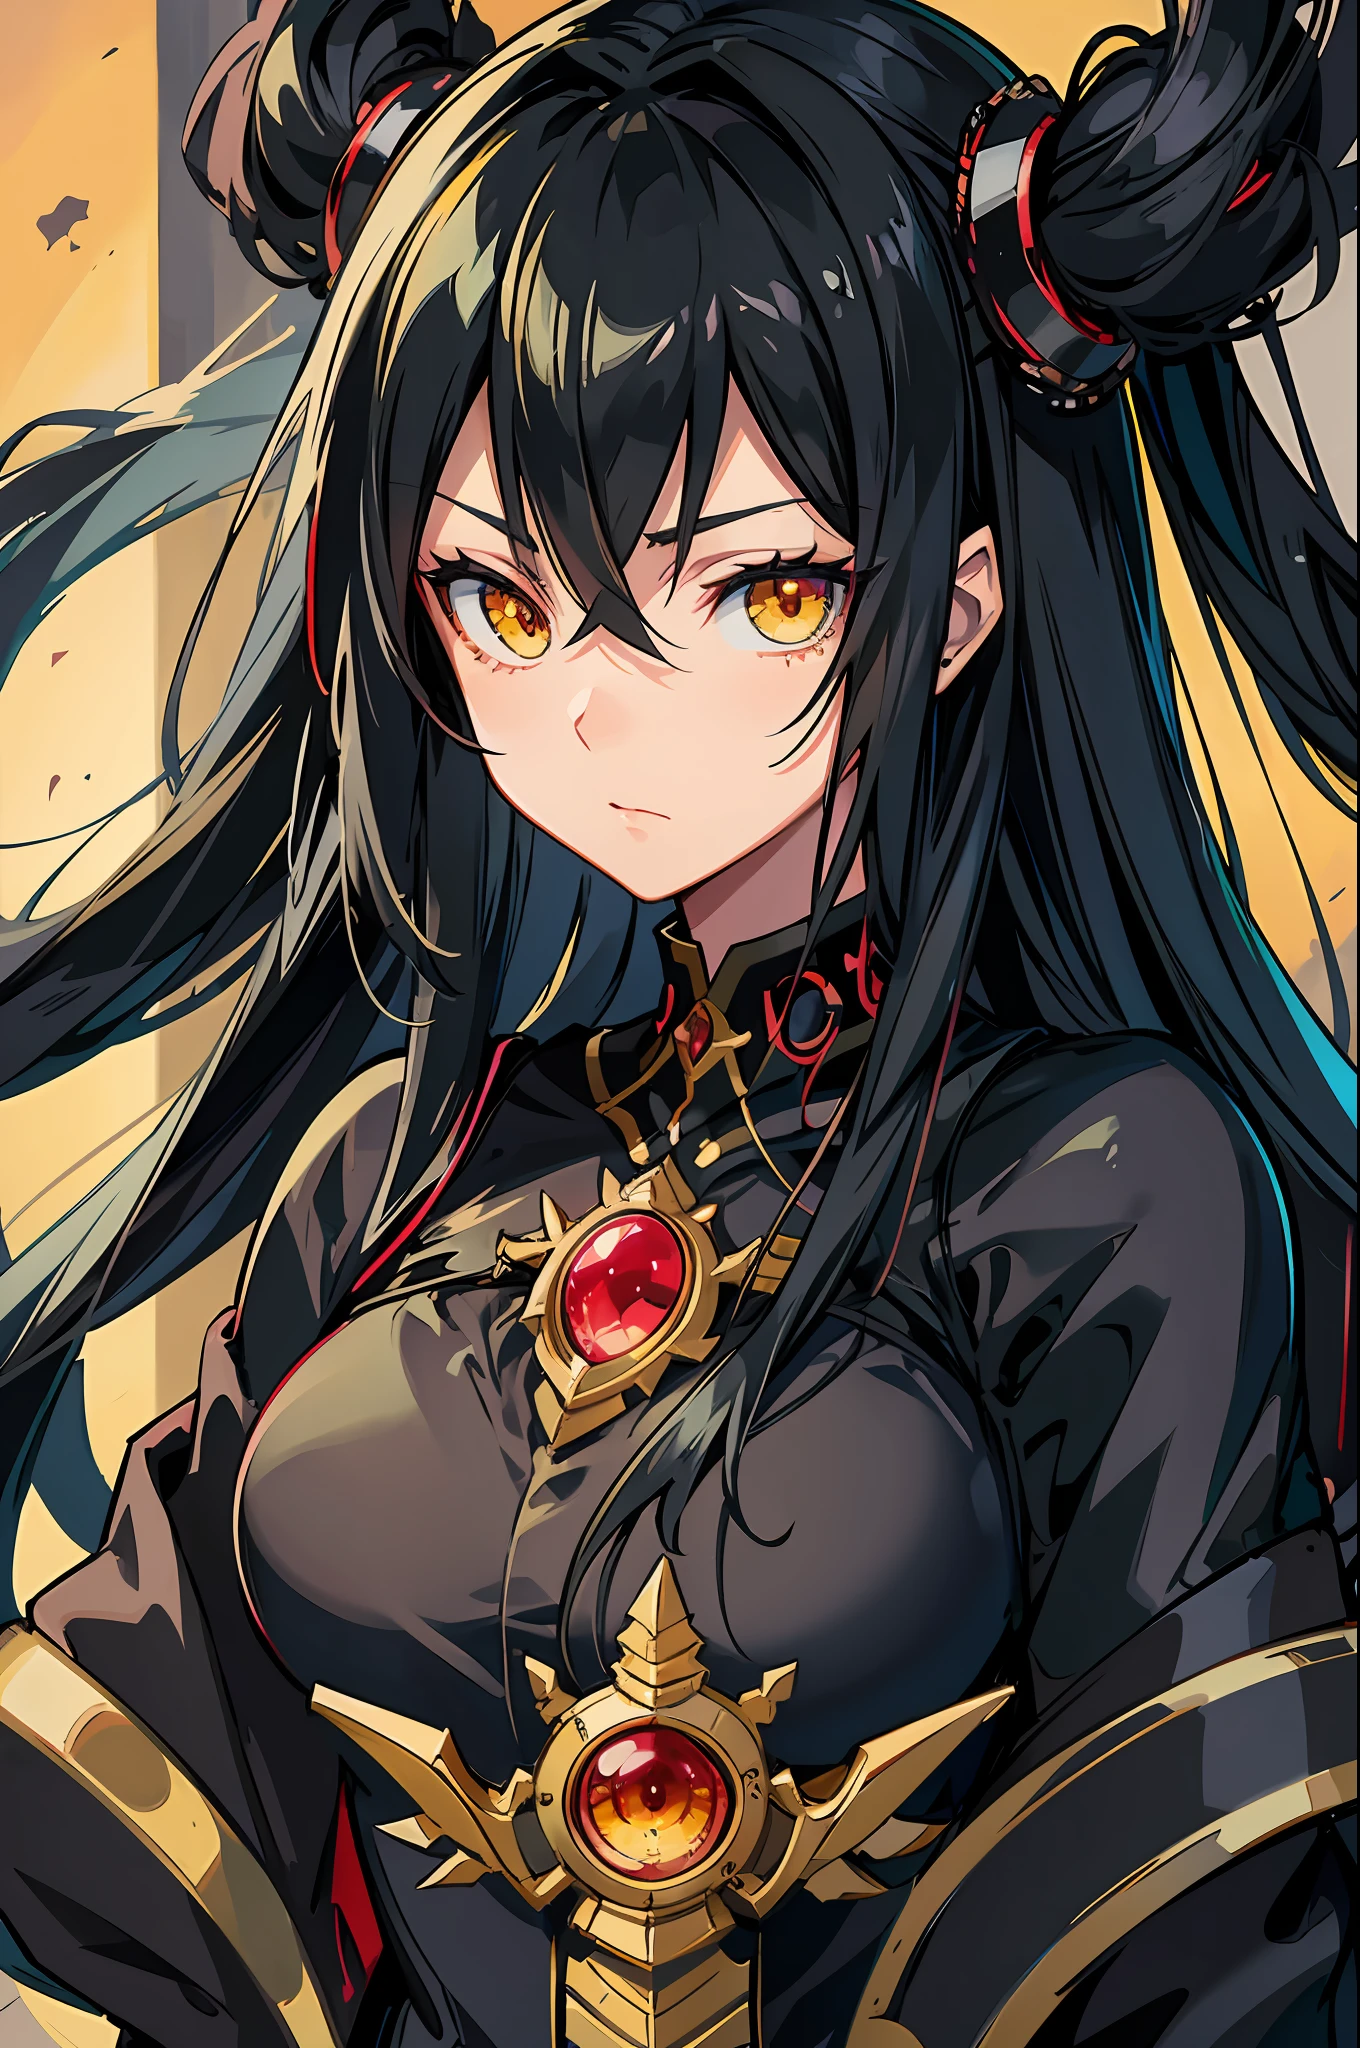 anime image of a woman with long black hair and yellow eyes, vanitas, black anime pupils in her eyes, close up of a young anime gir, cel shaded anime, with glowing yellow eyes, close up, anime still image, anime still